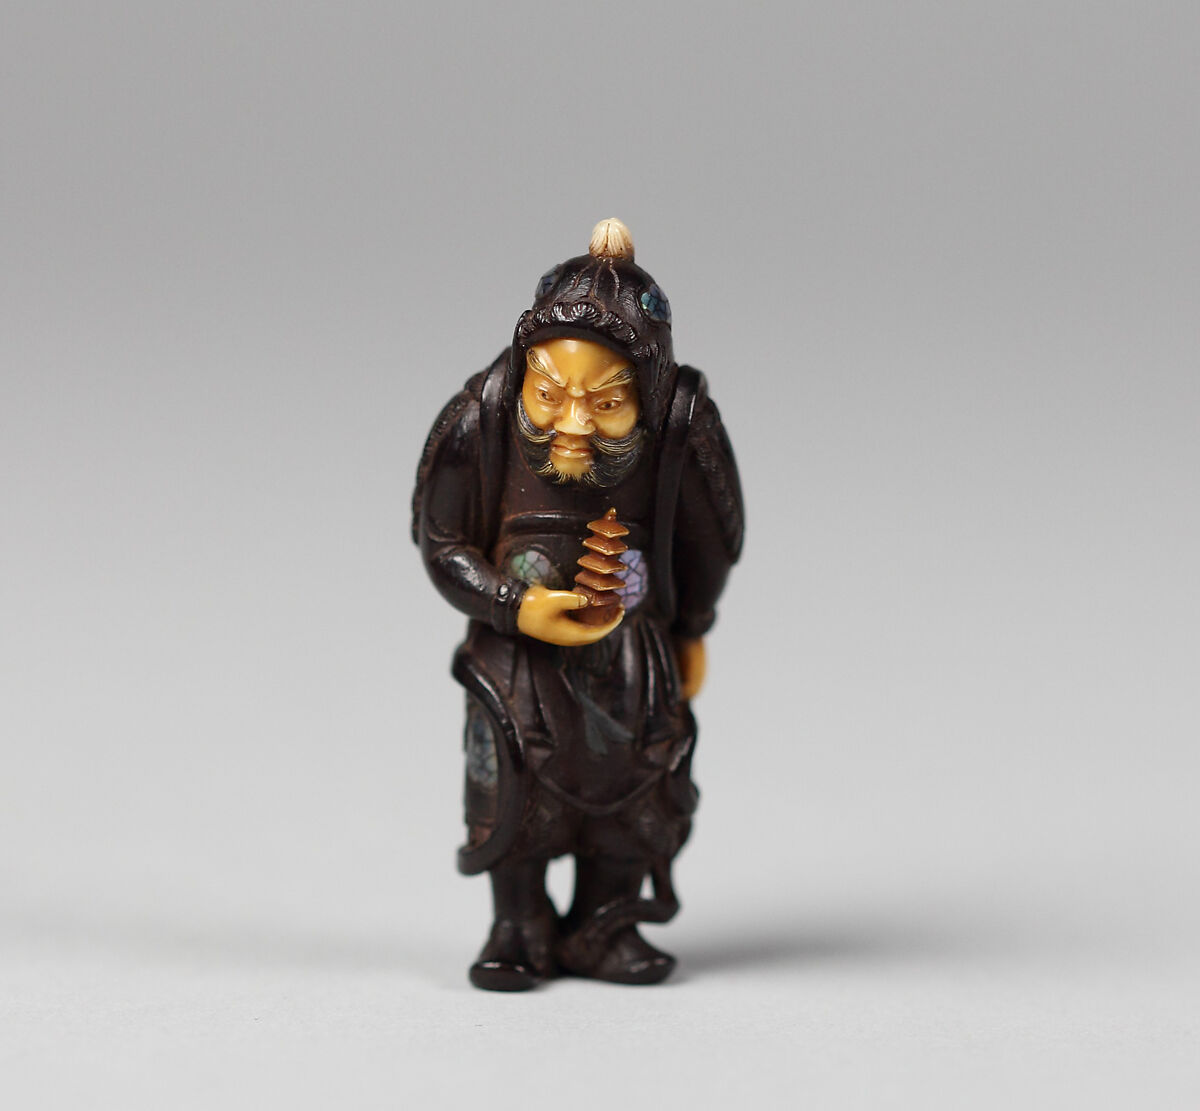 Netsuke of Bishamon, Black wood with ivory face and hands and inlaid ornamentation, Japan 